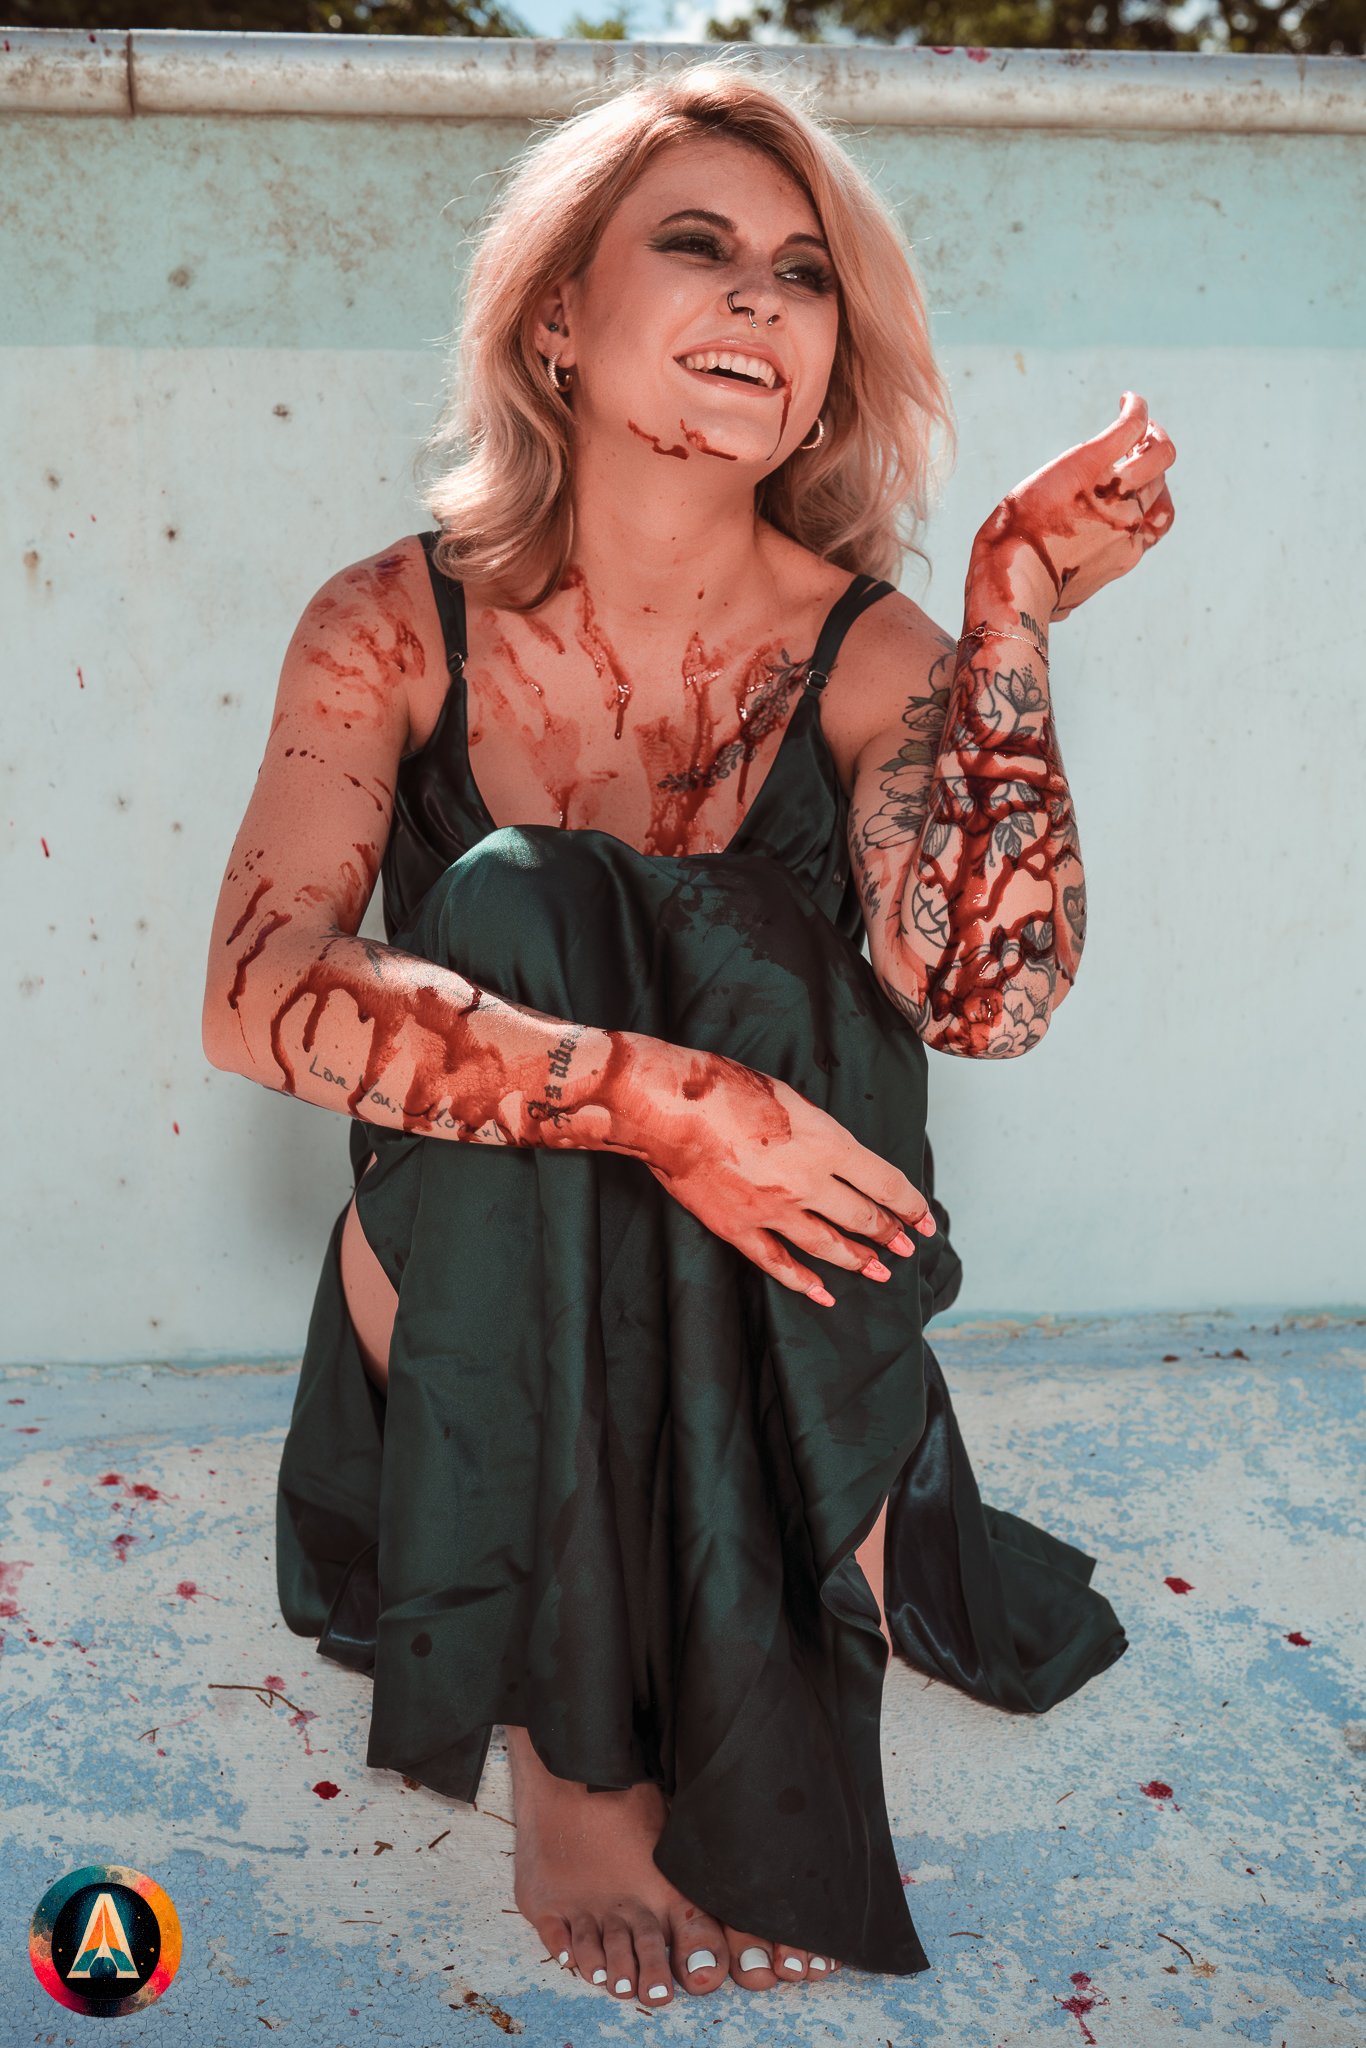 Blonde model courtney france poses in the haunted indiana state sanitarium pool in a elegant black / green dress covered in fake blood.